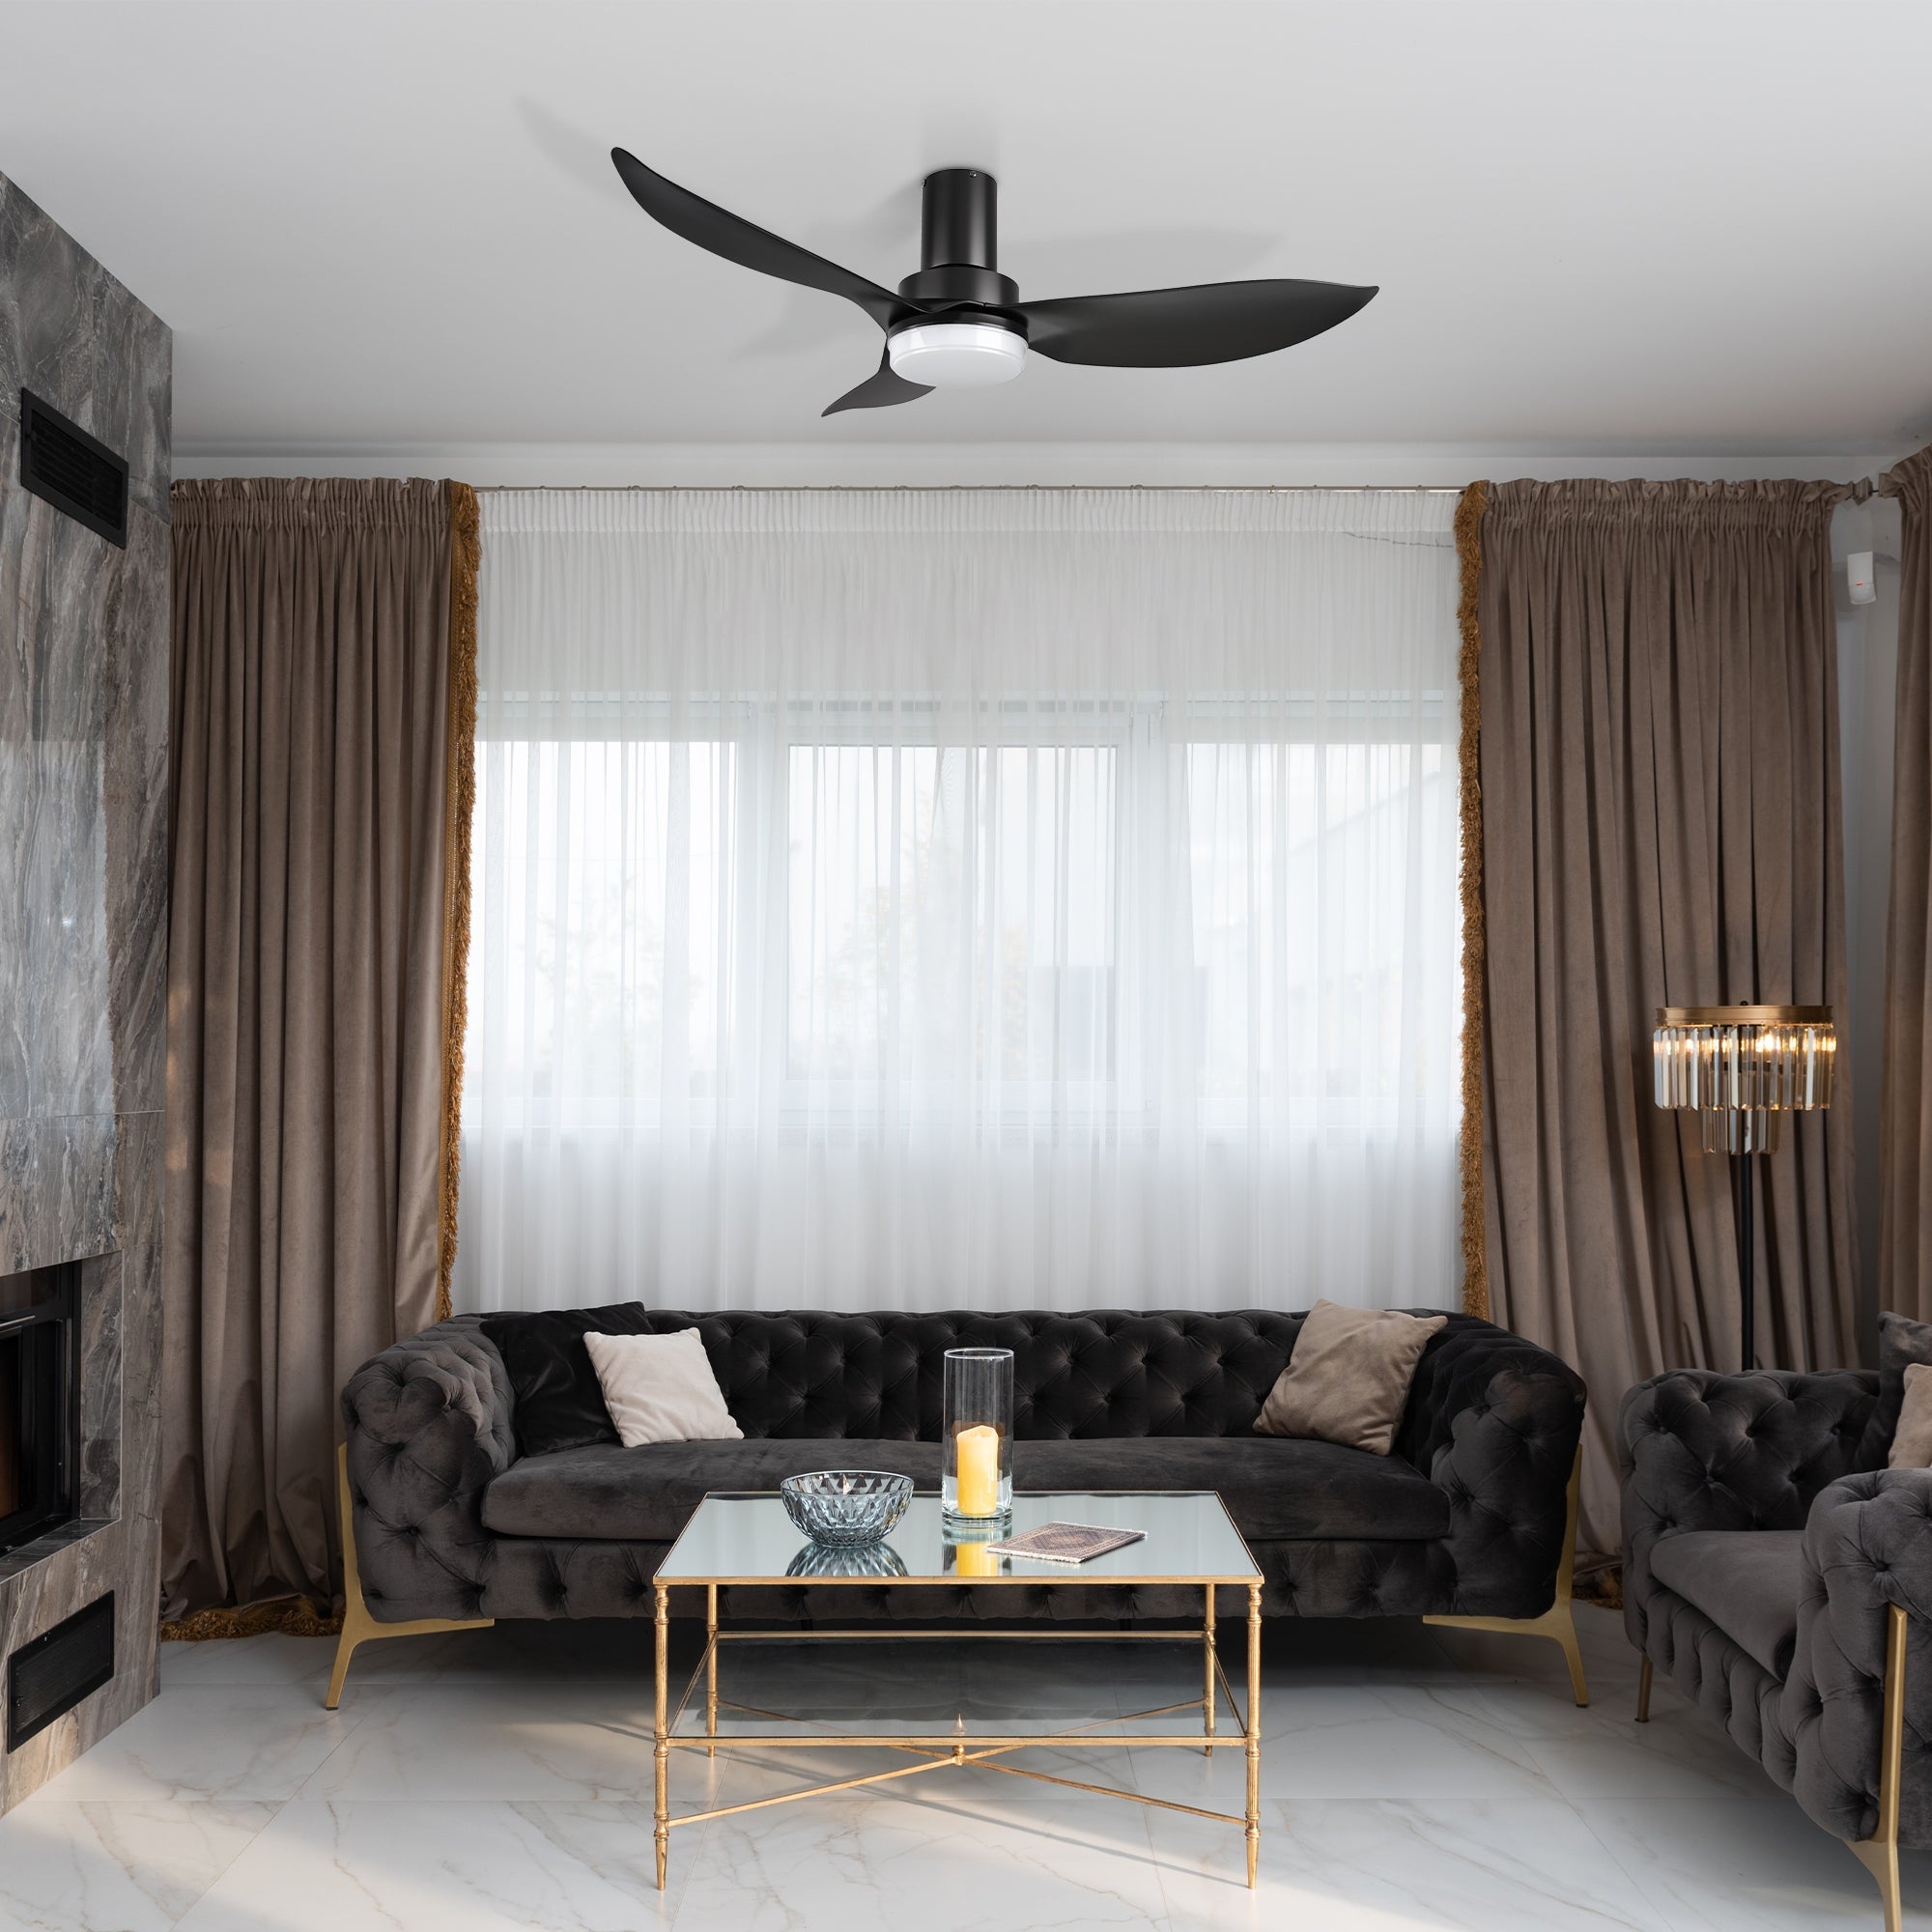  The Nefyn 45 inches flush mount ceiling fan is perfectly suitable for even the smallest spaces! With its compact design, flush mount capability, advanced DC motor, and radiant LED lighting, this Nefyn remote control ceiling fan is available in either black or white, allowing you to effortlessly match or complement your preferred decor style.#color_Black